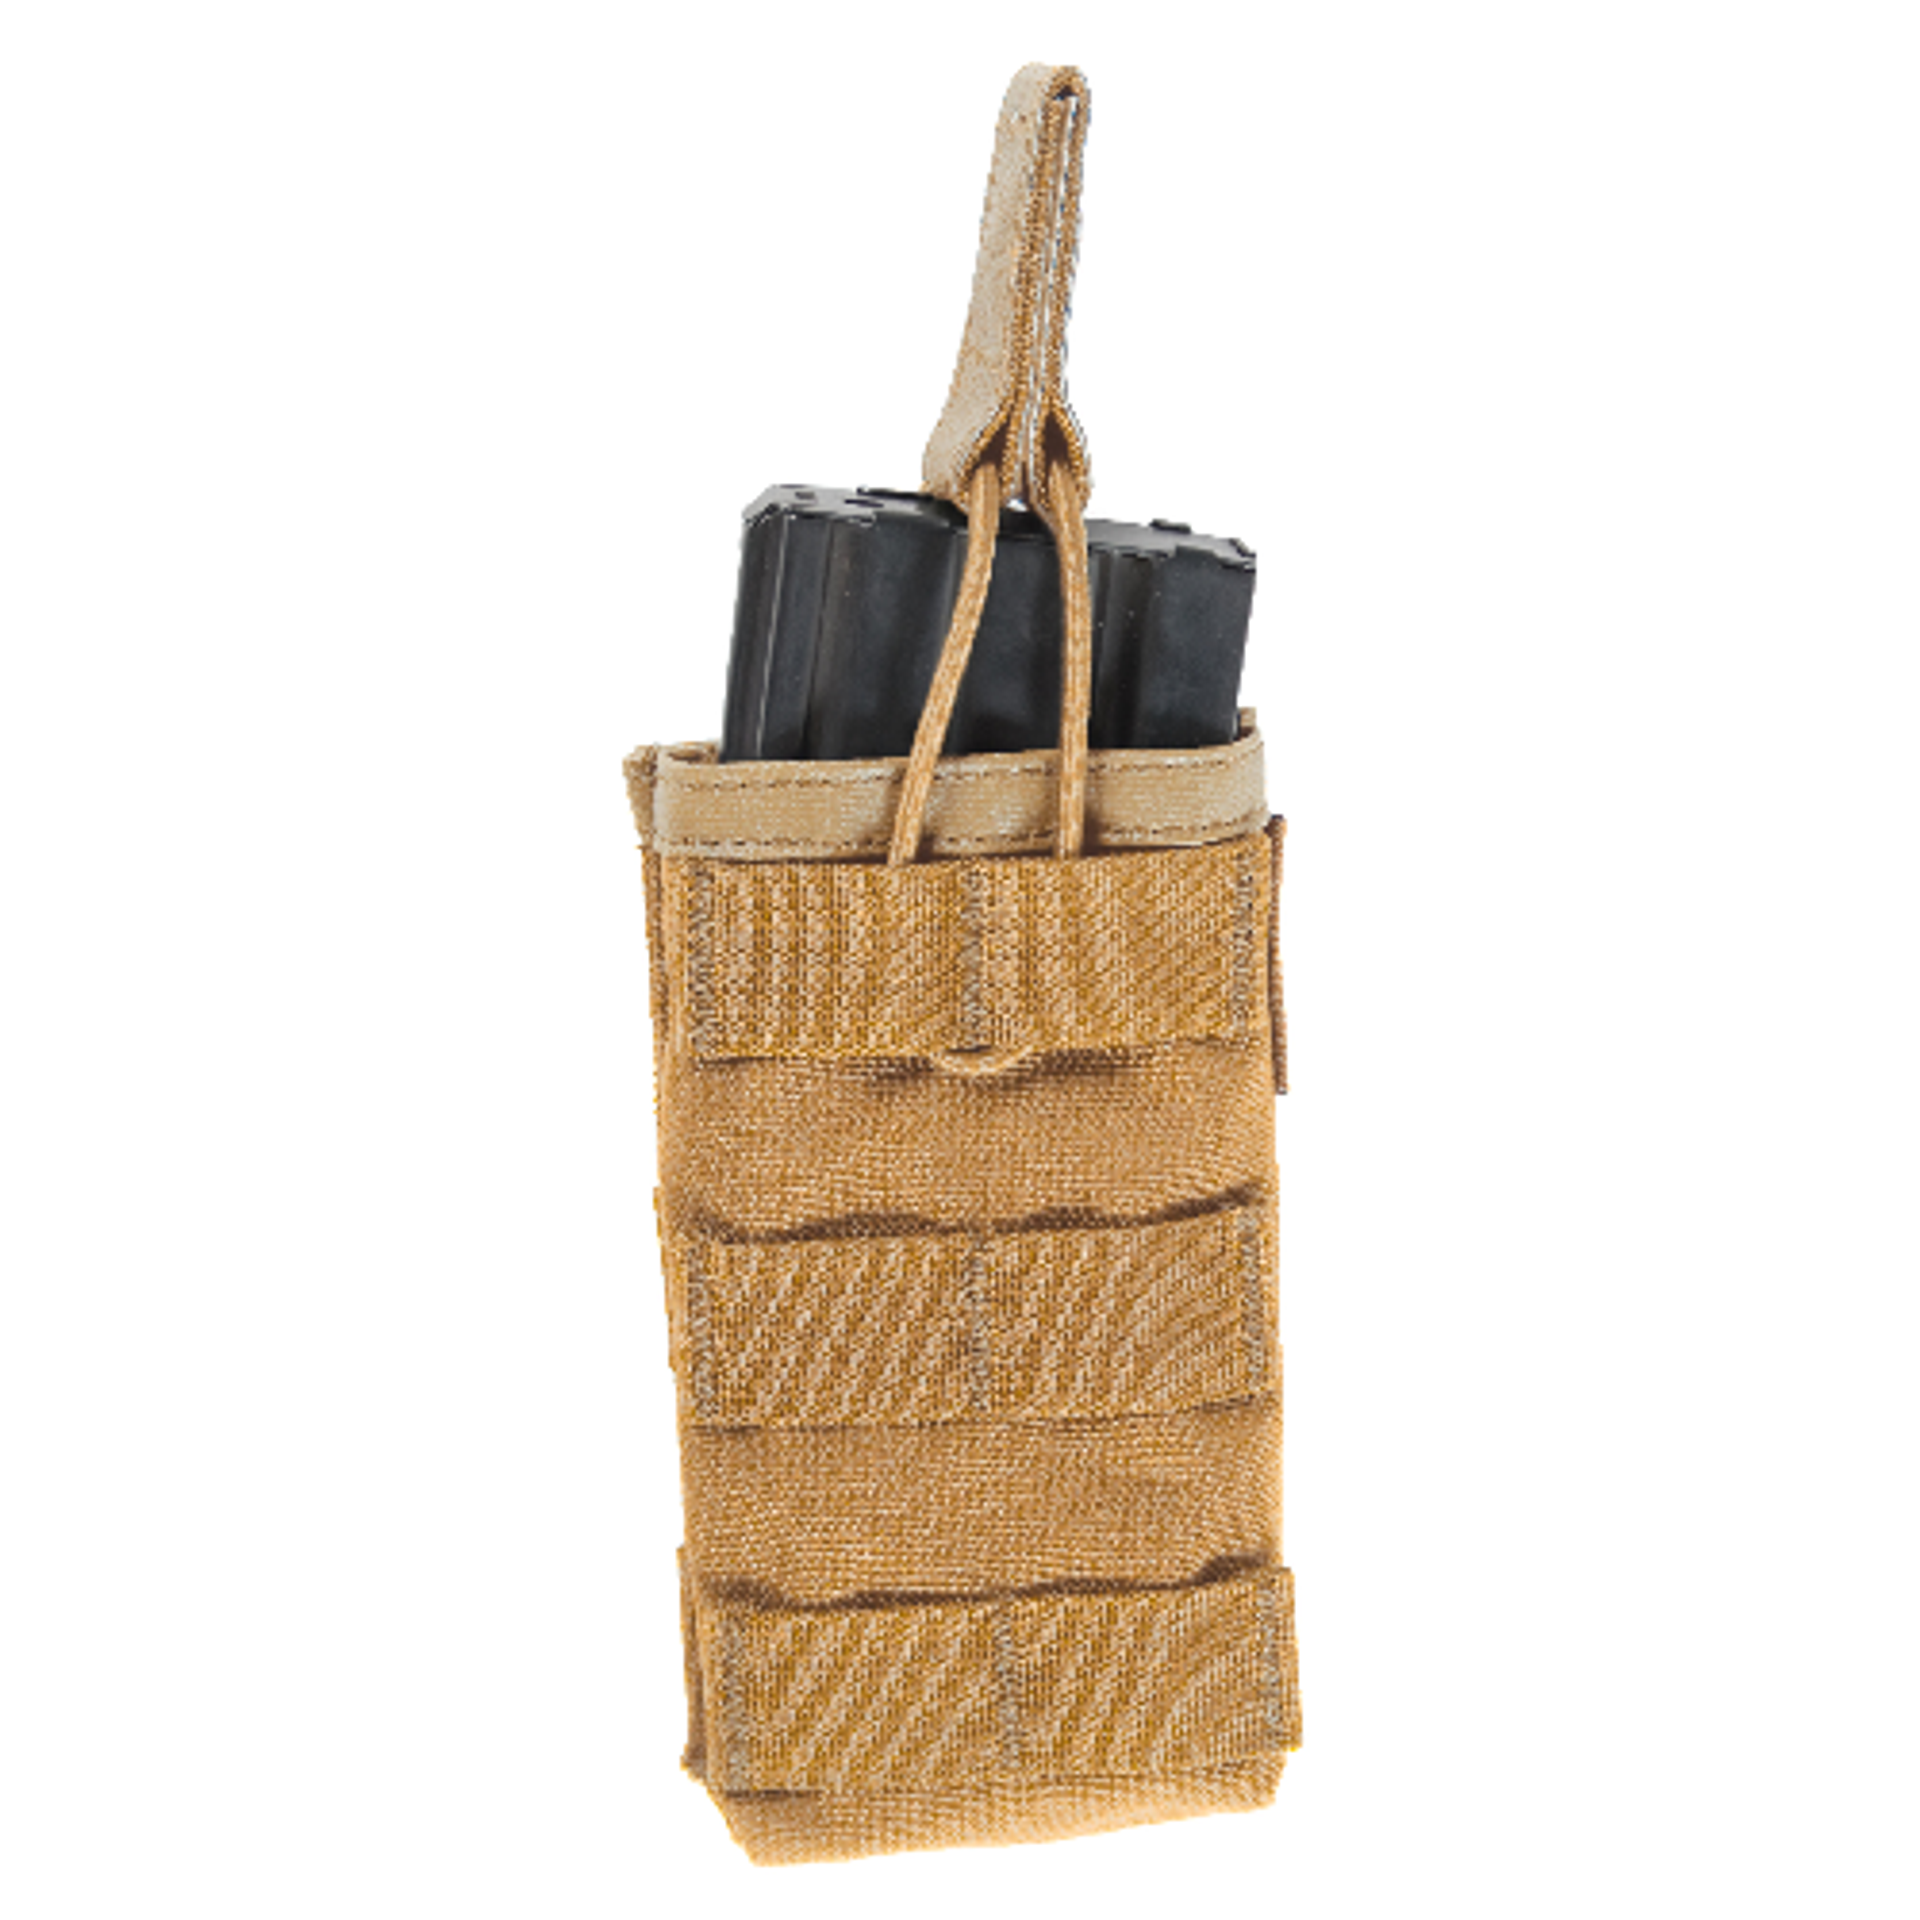 Single M4/M16 Mag Pouch low price of $20.45